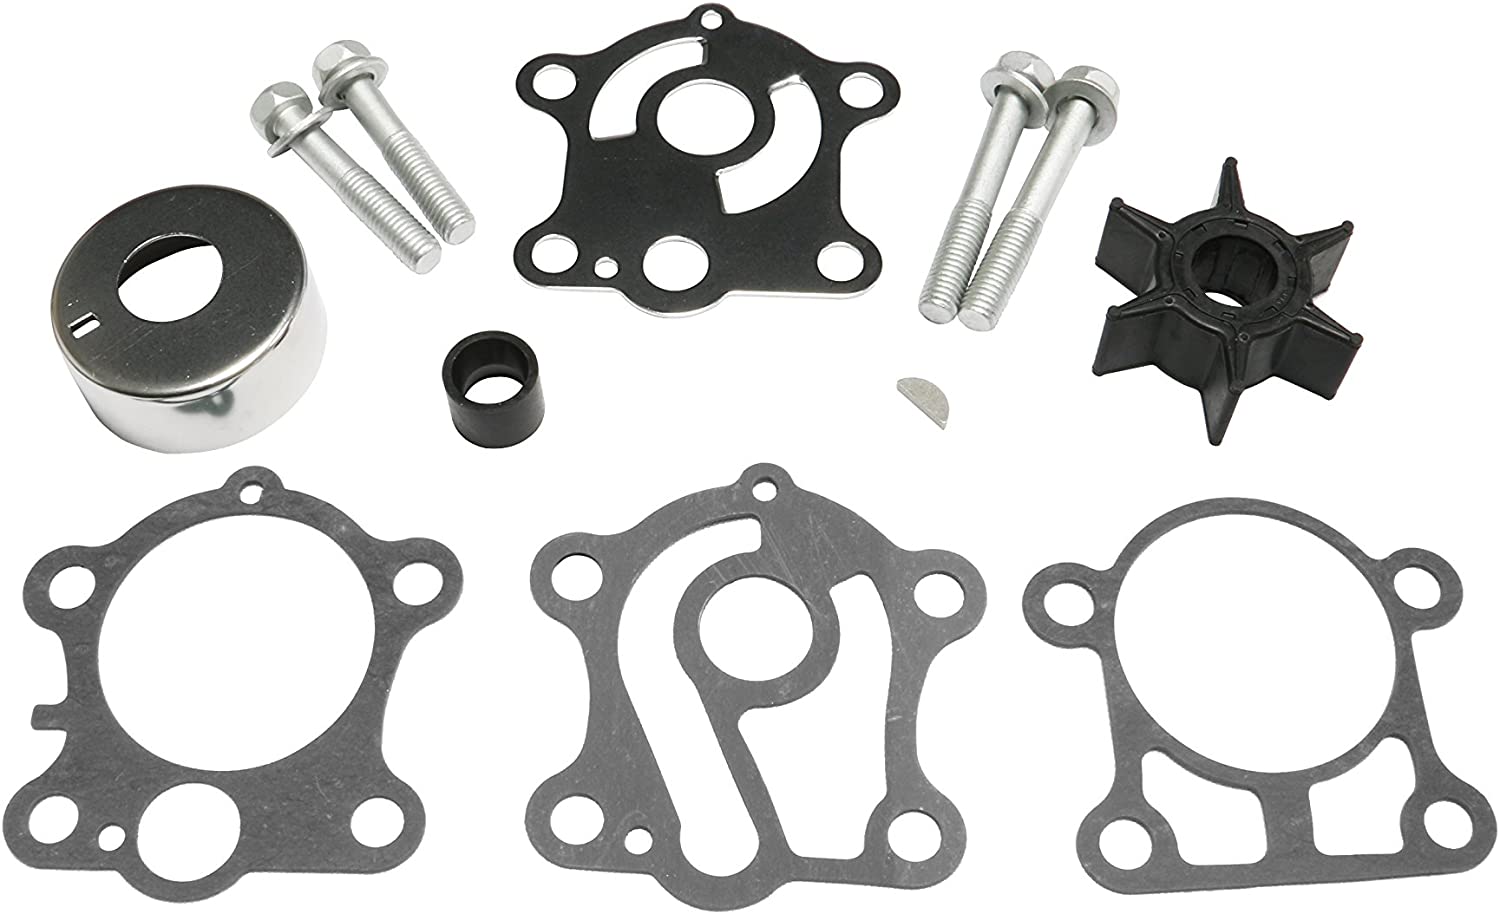 Boat Engine 6H4-W0078 6H4-W0078-00 Water Pump Kit For Yamaha 40HP 50HP Boat Outboard Motors